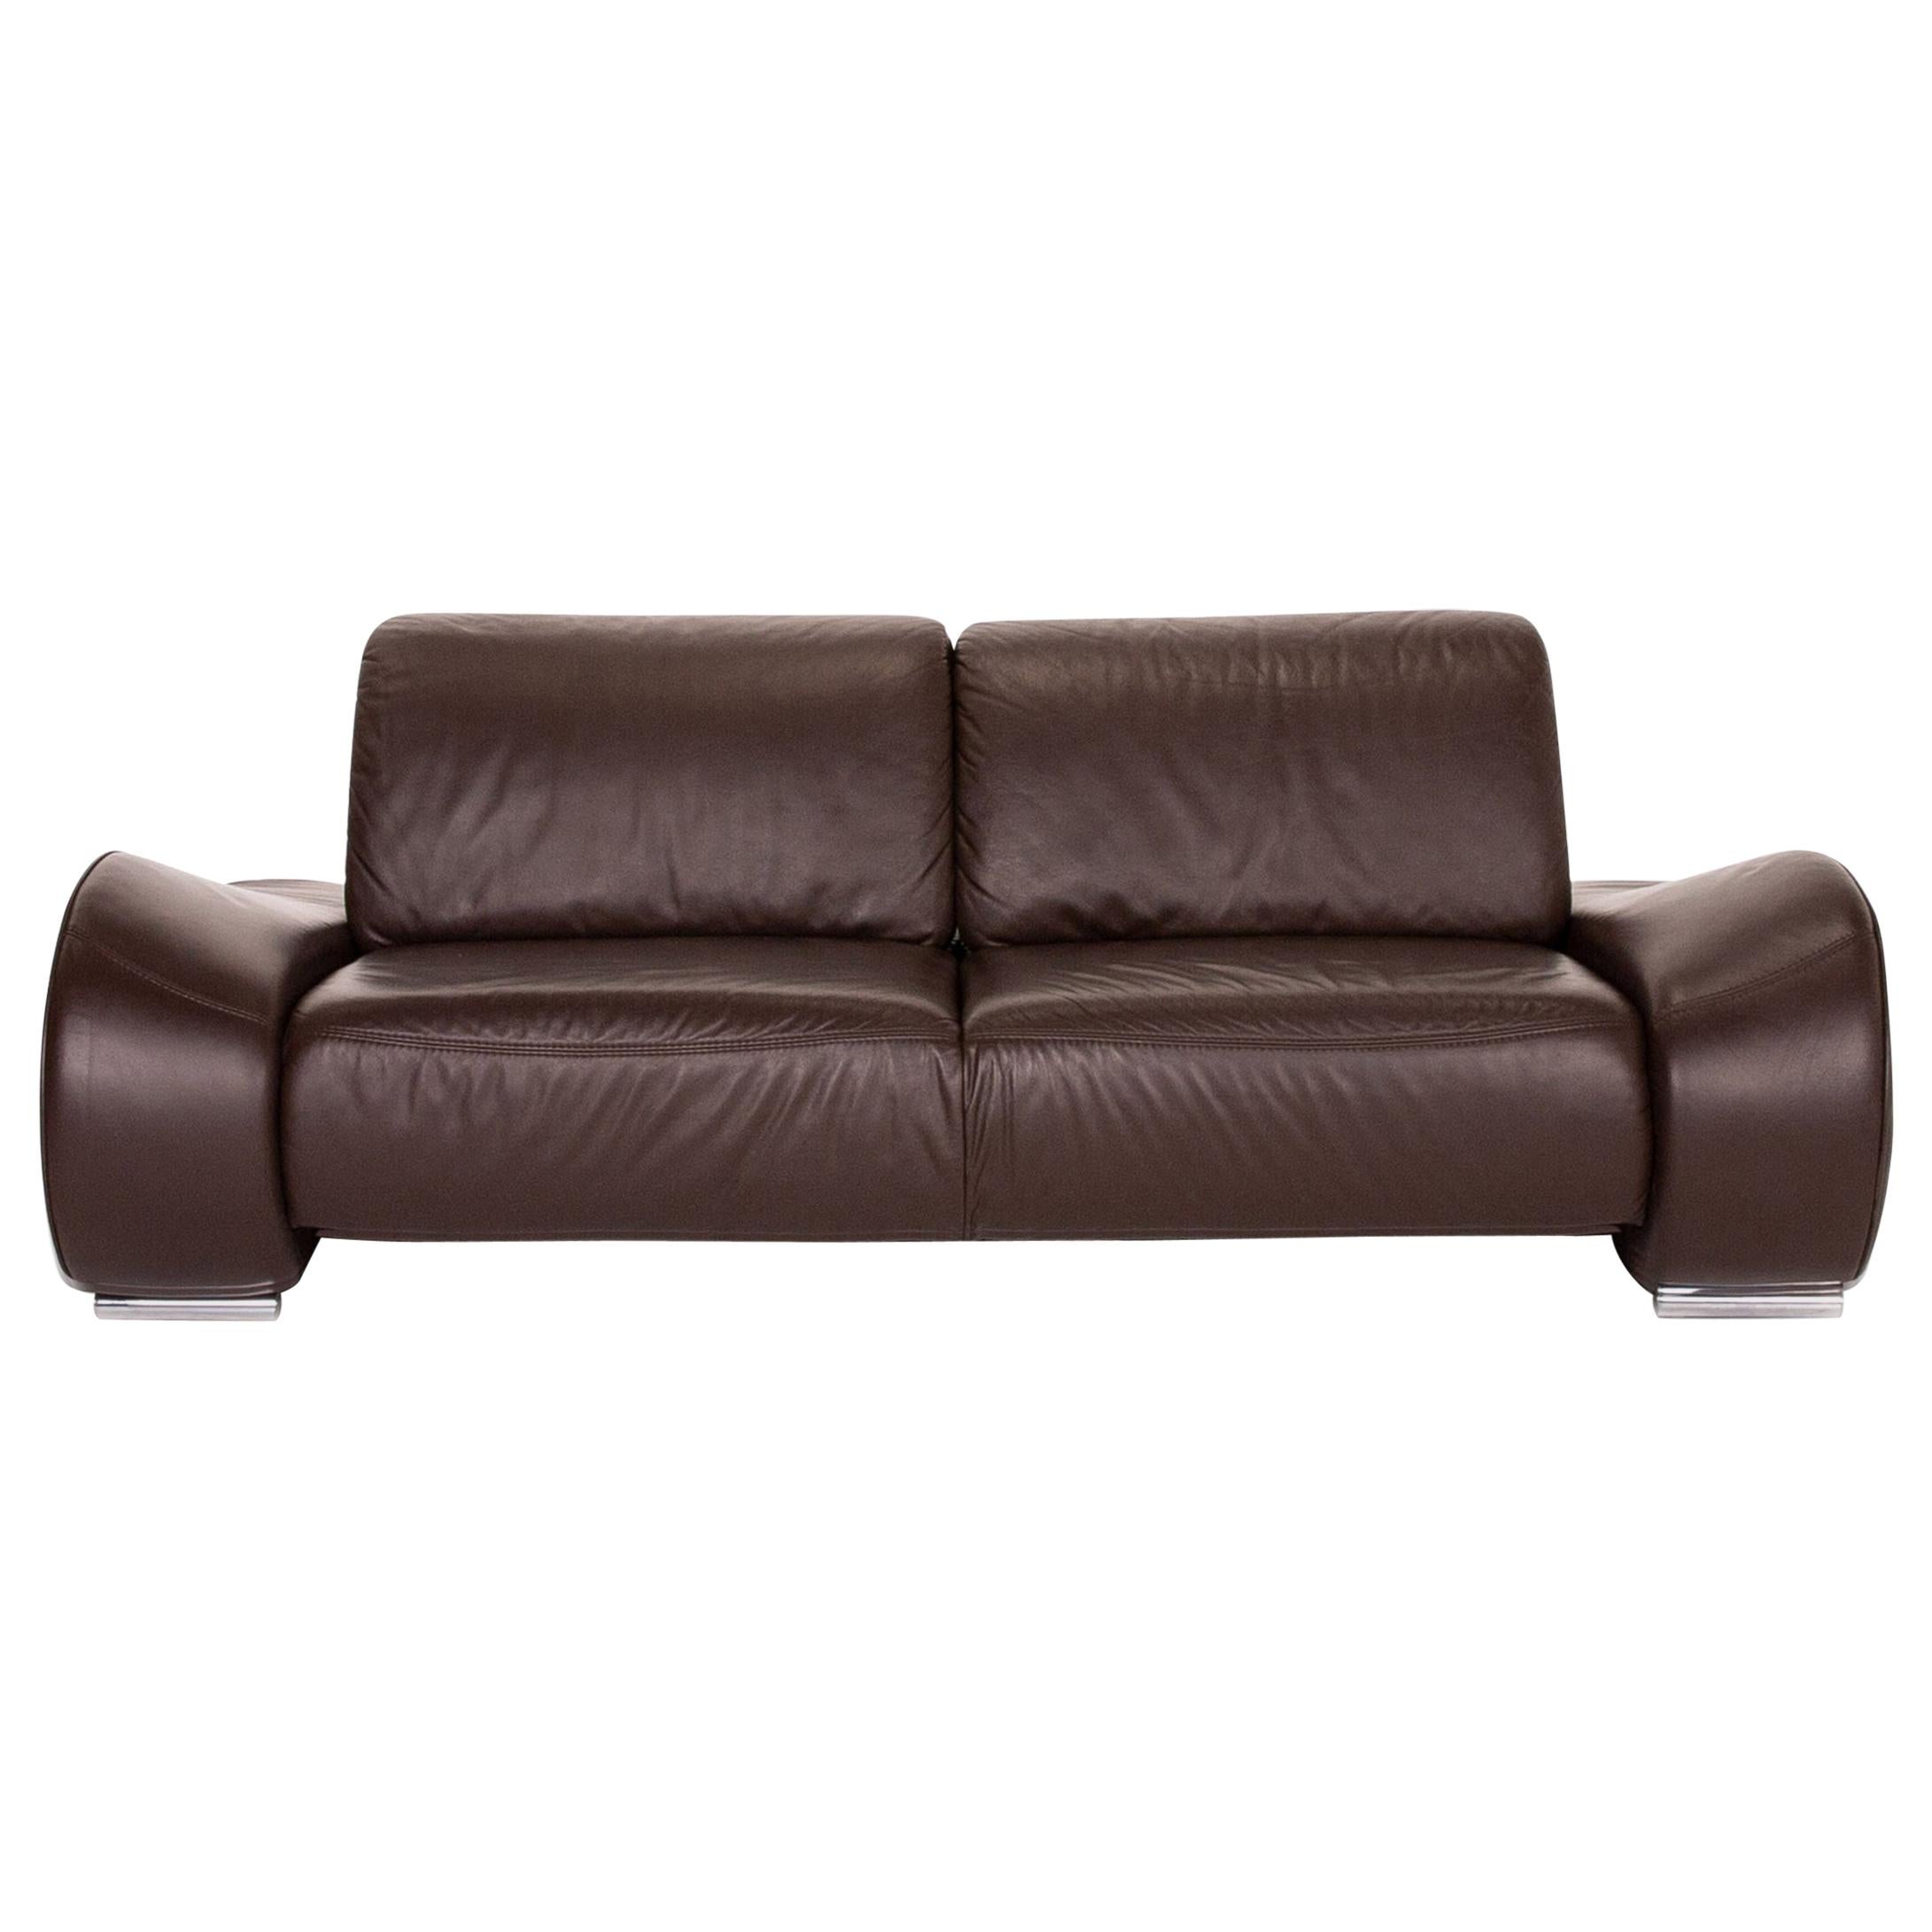 Sample Ring Leather Sofa Brown Dark Brown Two-Seat Couch For Sale